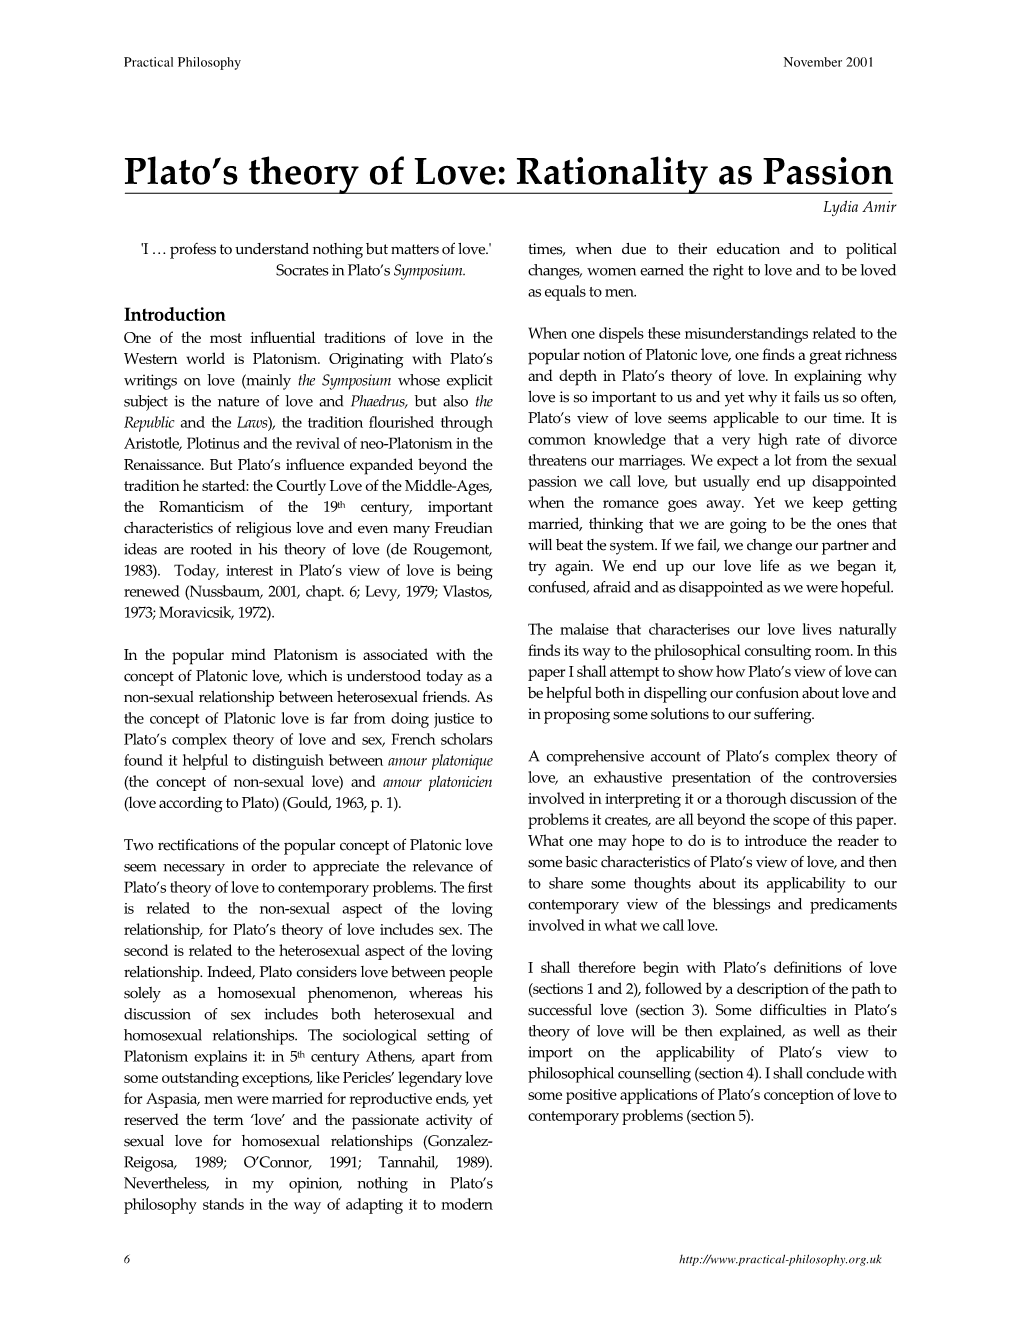 Plato's Theory of Love: Rationality As Passion Lydia Amir